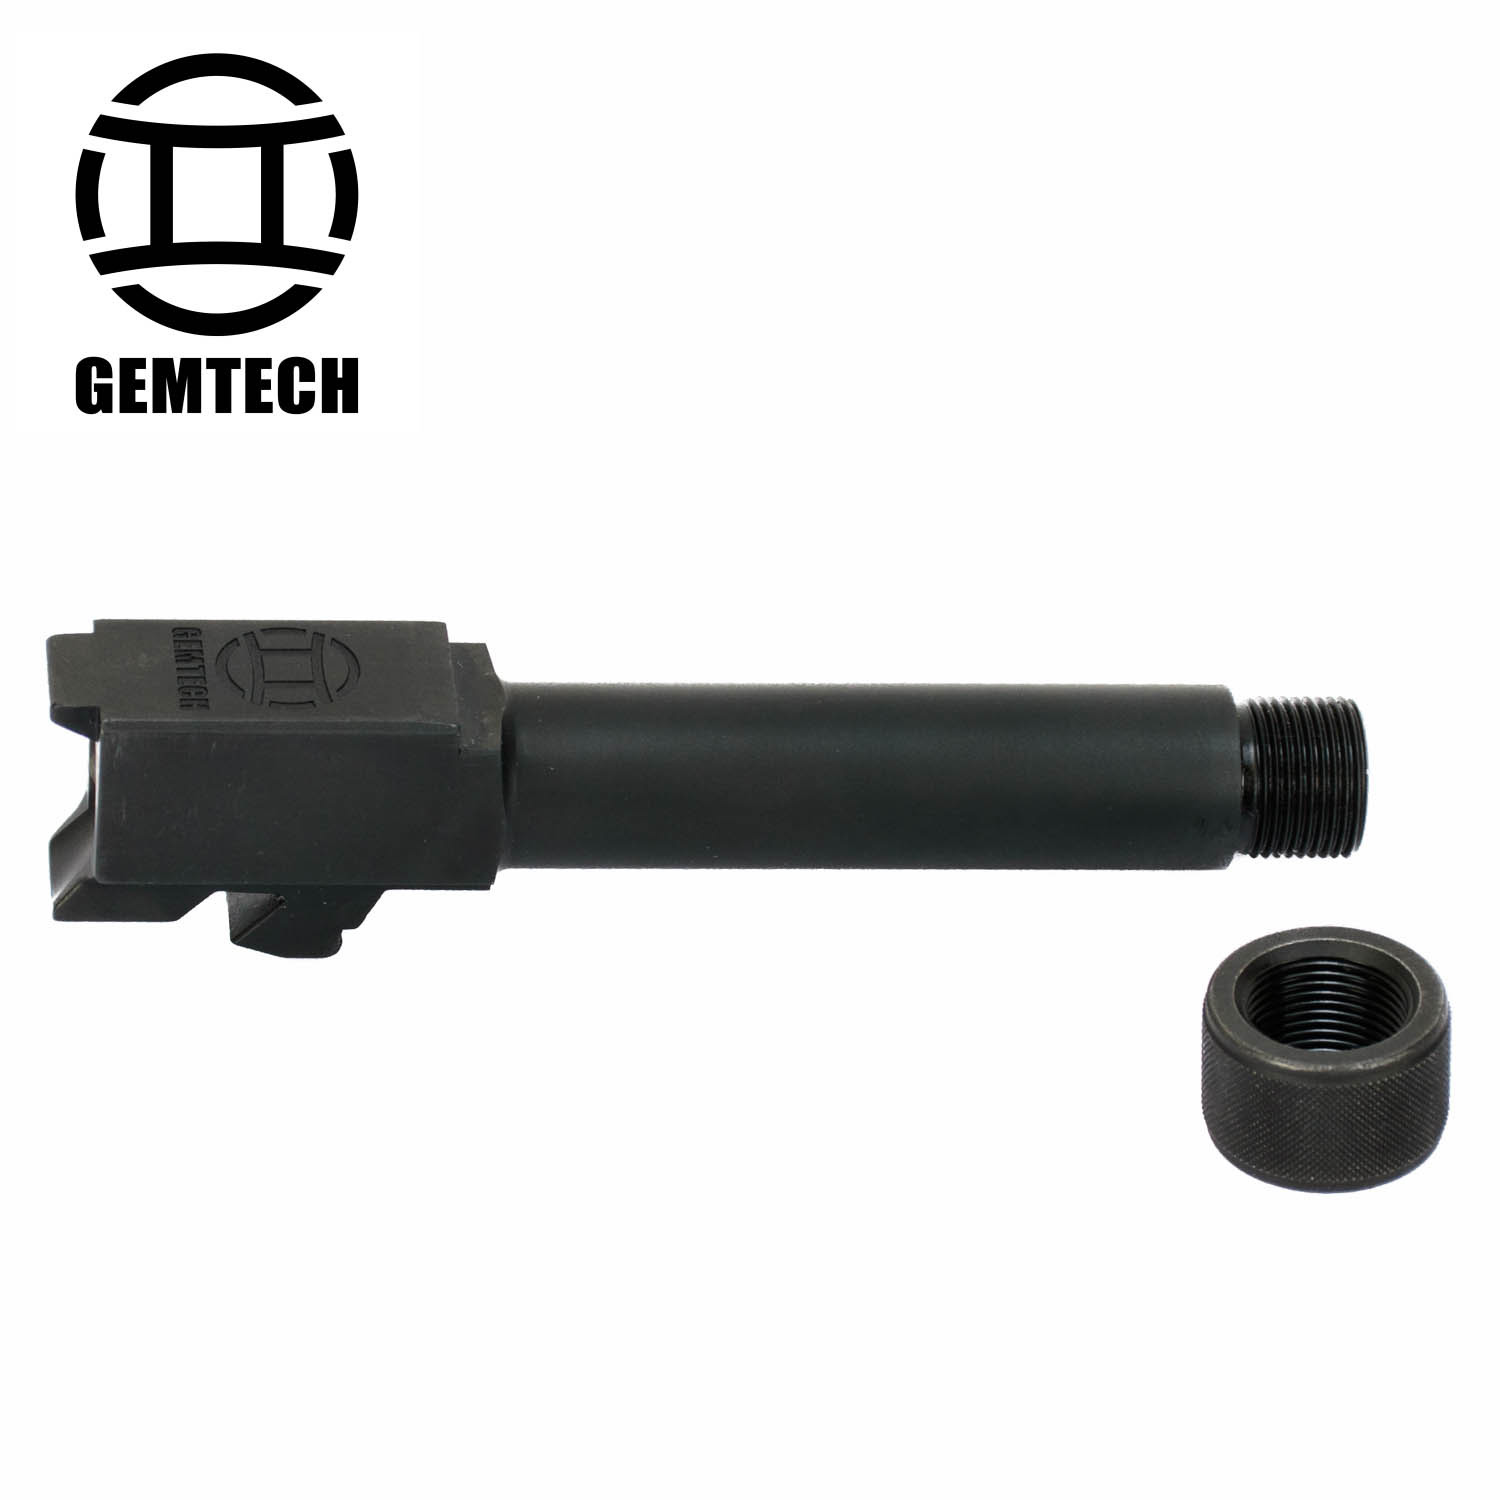 Description: Gemtech 9mm Extended and Threaded Barrel with Thread Protector...